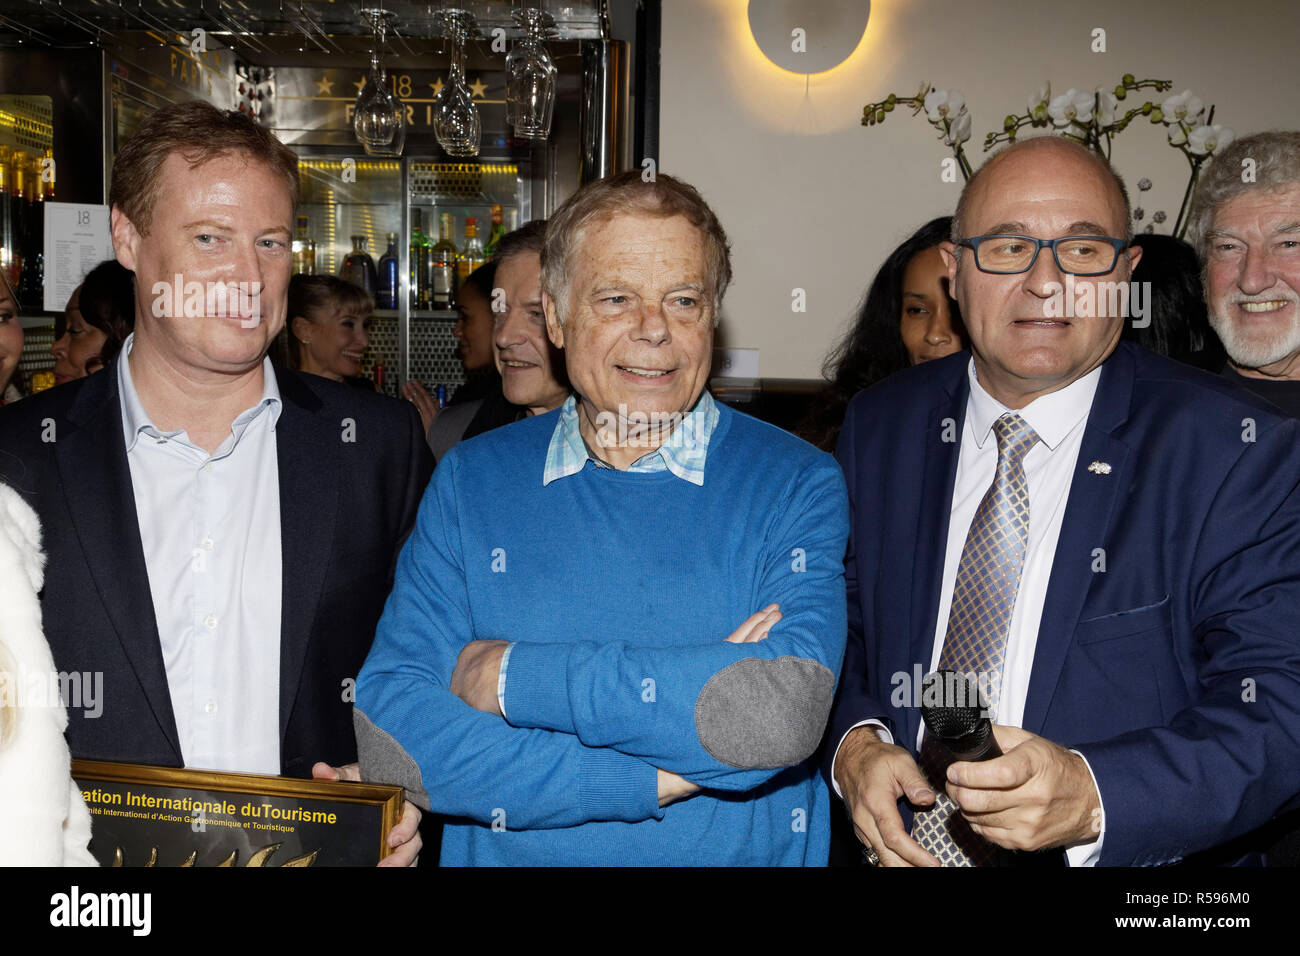 Paris, France. 29th Nov, 2018. Thomas Chaumette, Gérard Majax and Jean-Eric  Duluc - Jean-Eric Duluc, President of the International Federation of  Tourism awarded the 2018 Lauriers d'or of Excellence International Hotel  Tourism